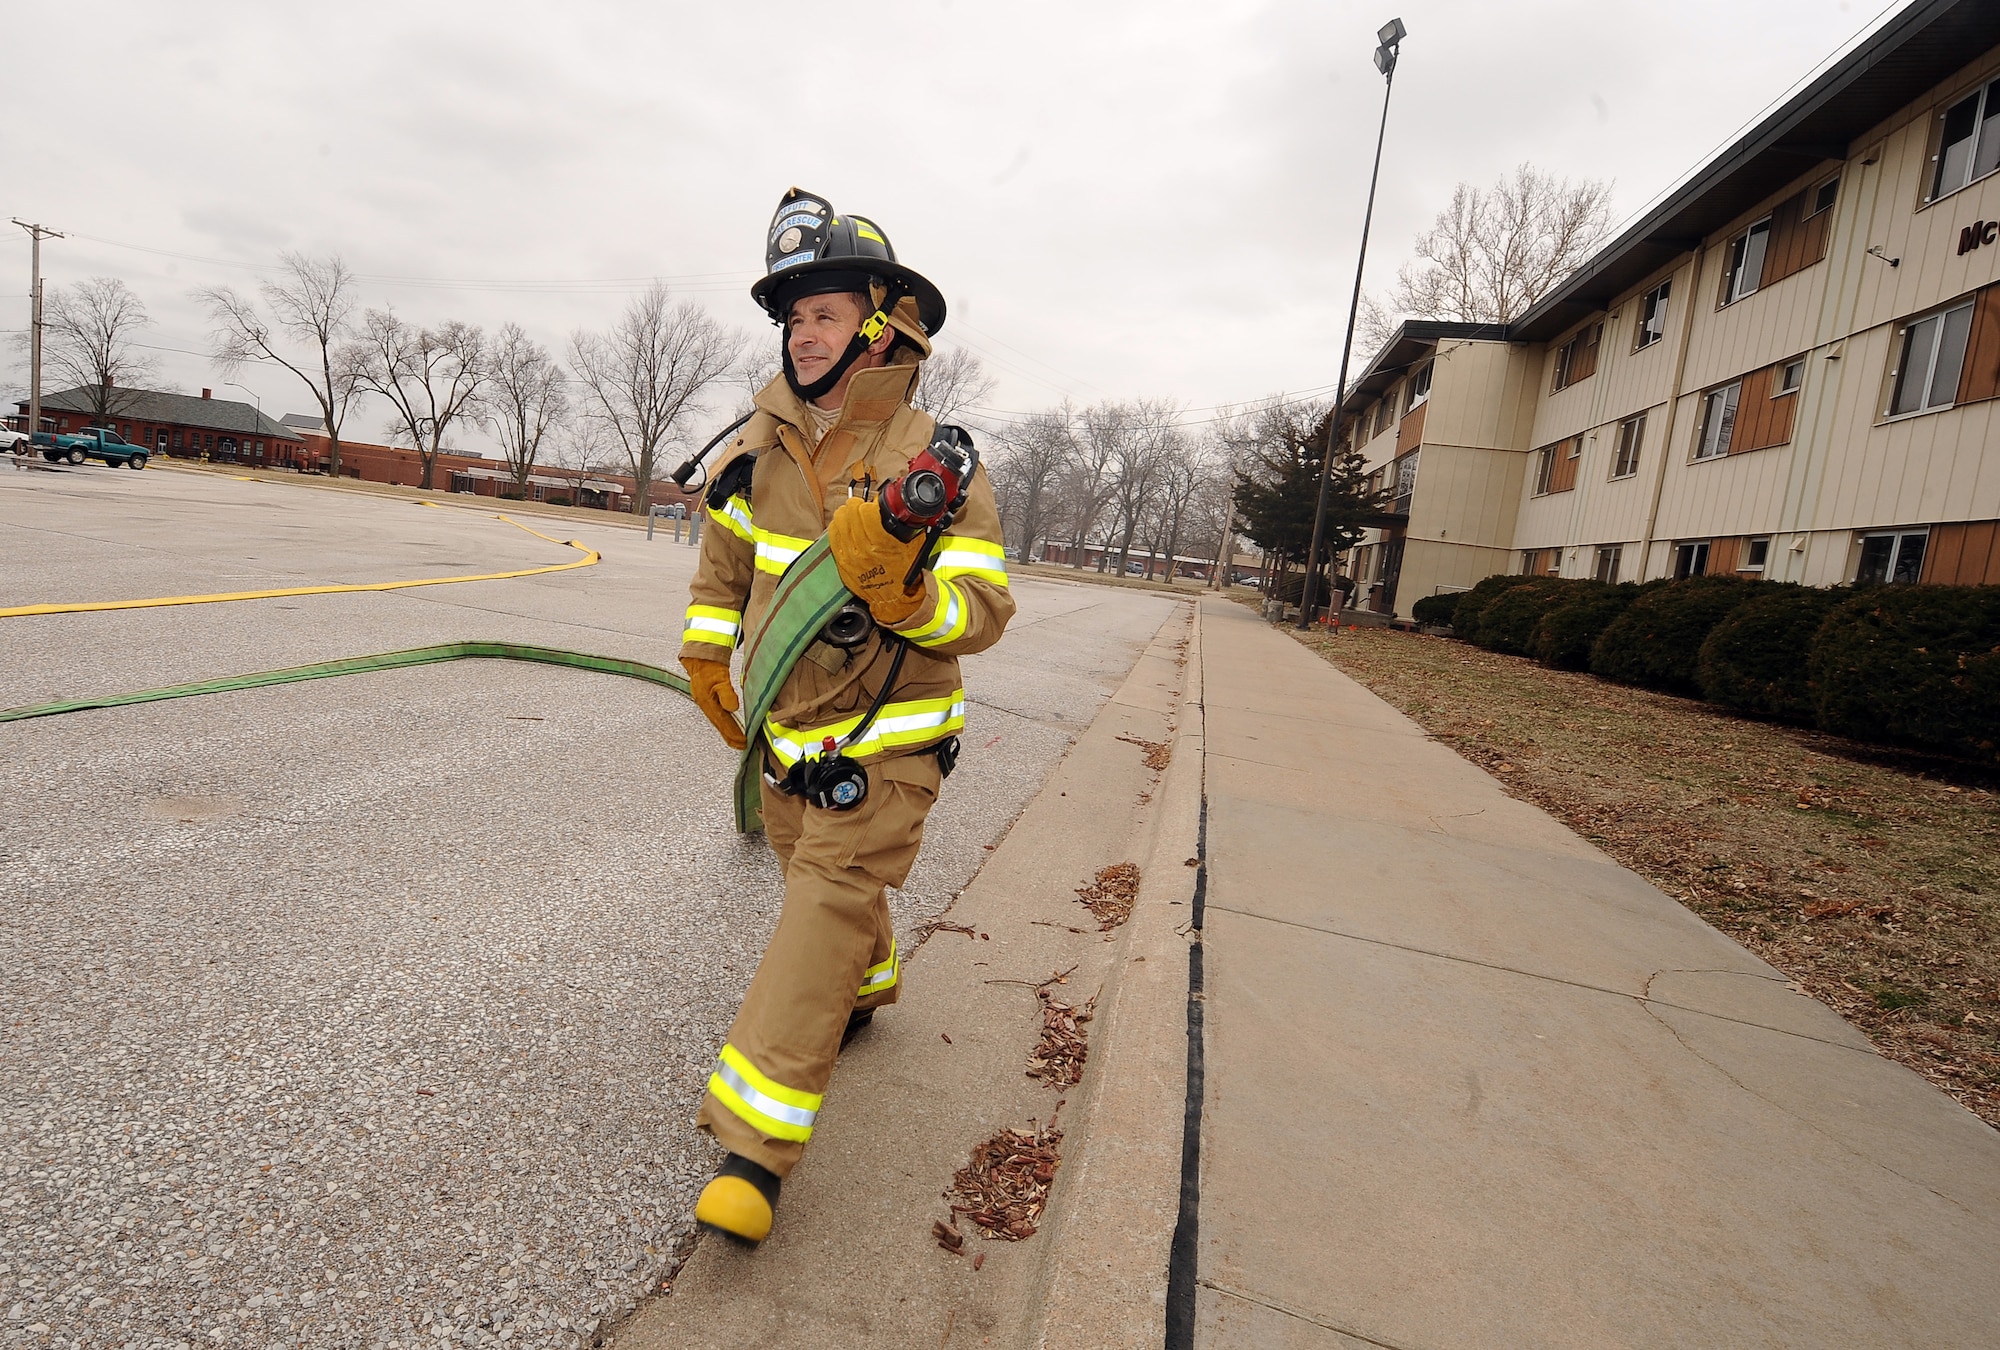 U.S. Air Force Brig. Gen. Donald Bacon, 55th Wing commander, takes an unraveled hose from a fire truck prior to entering McCoy Hall, a former dorm building, to experience what it looks like to enter a burning building to find survivors on Offutt Air Force Base, Neb., March 7.  Smoke machines turned hallways into opaque walls of gray as Bacon made his way through the building to find "dummies" representing real people.  (U.S. Air Force photo by Josh Plueger/Released).